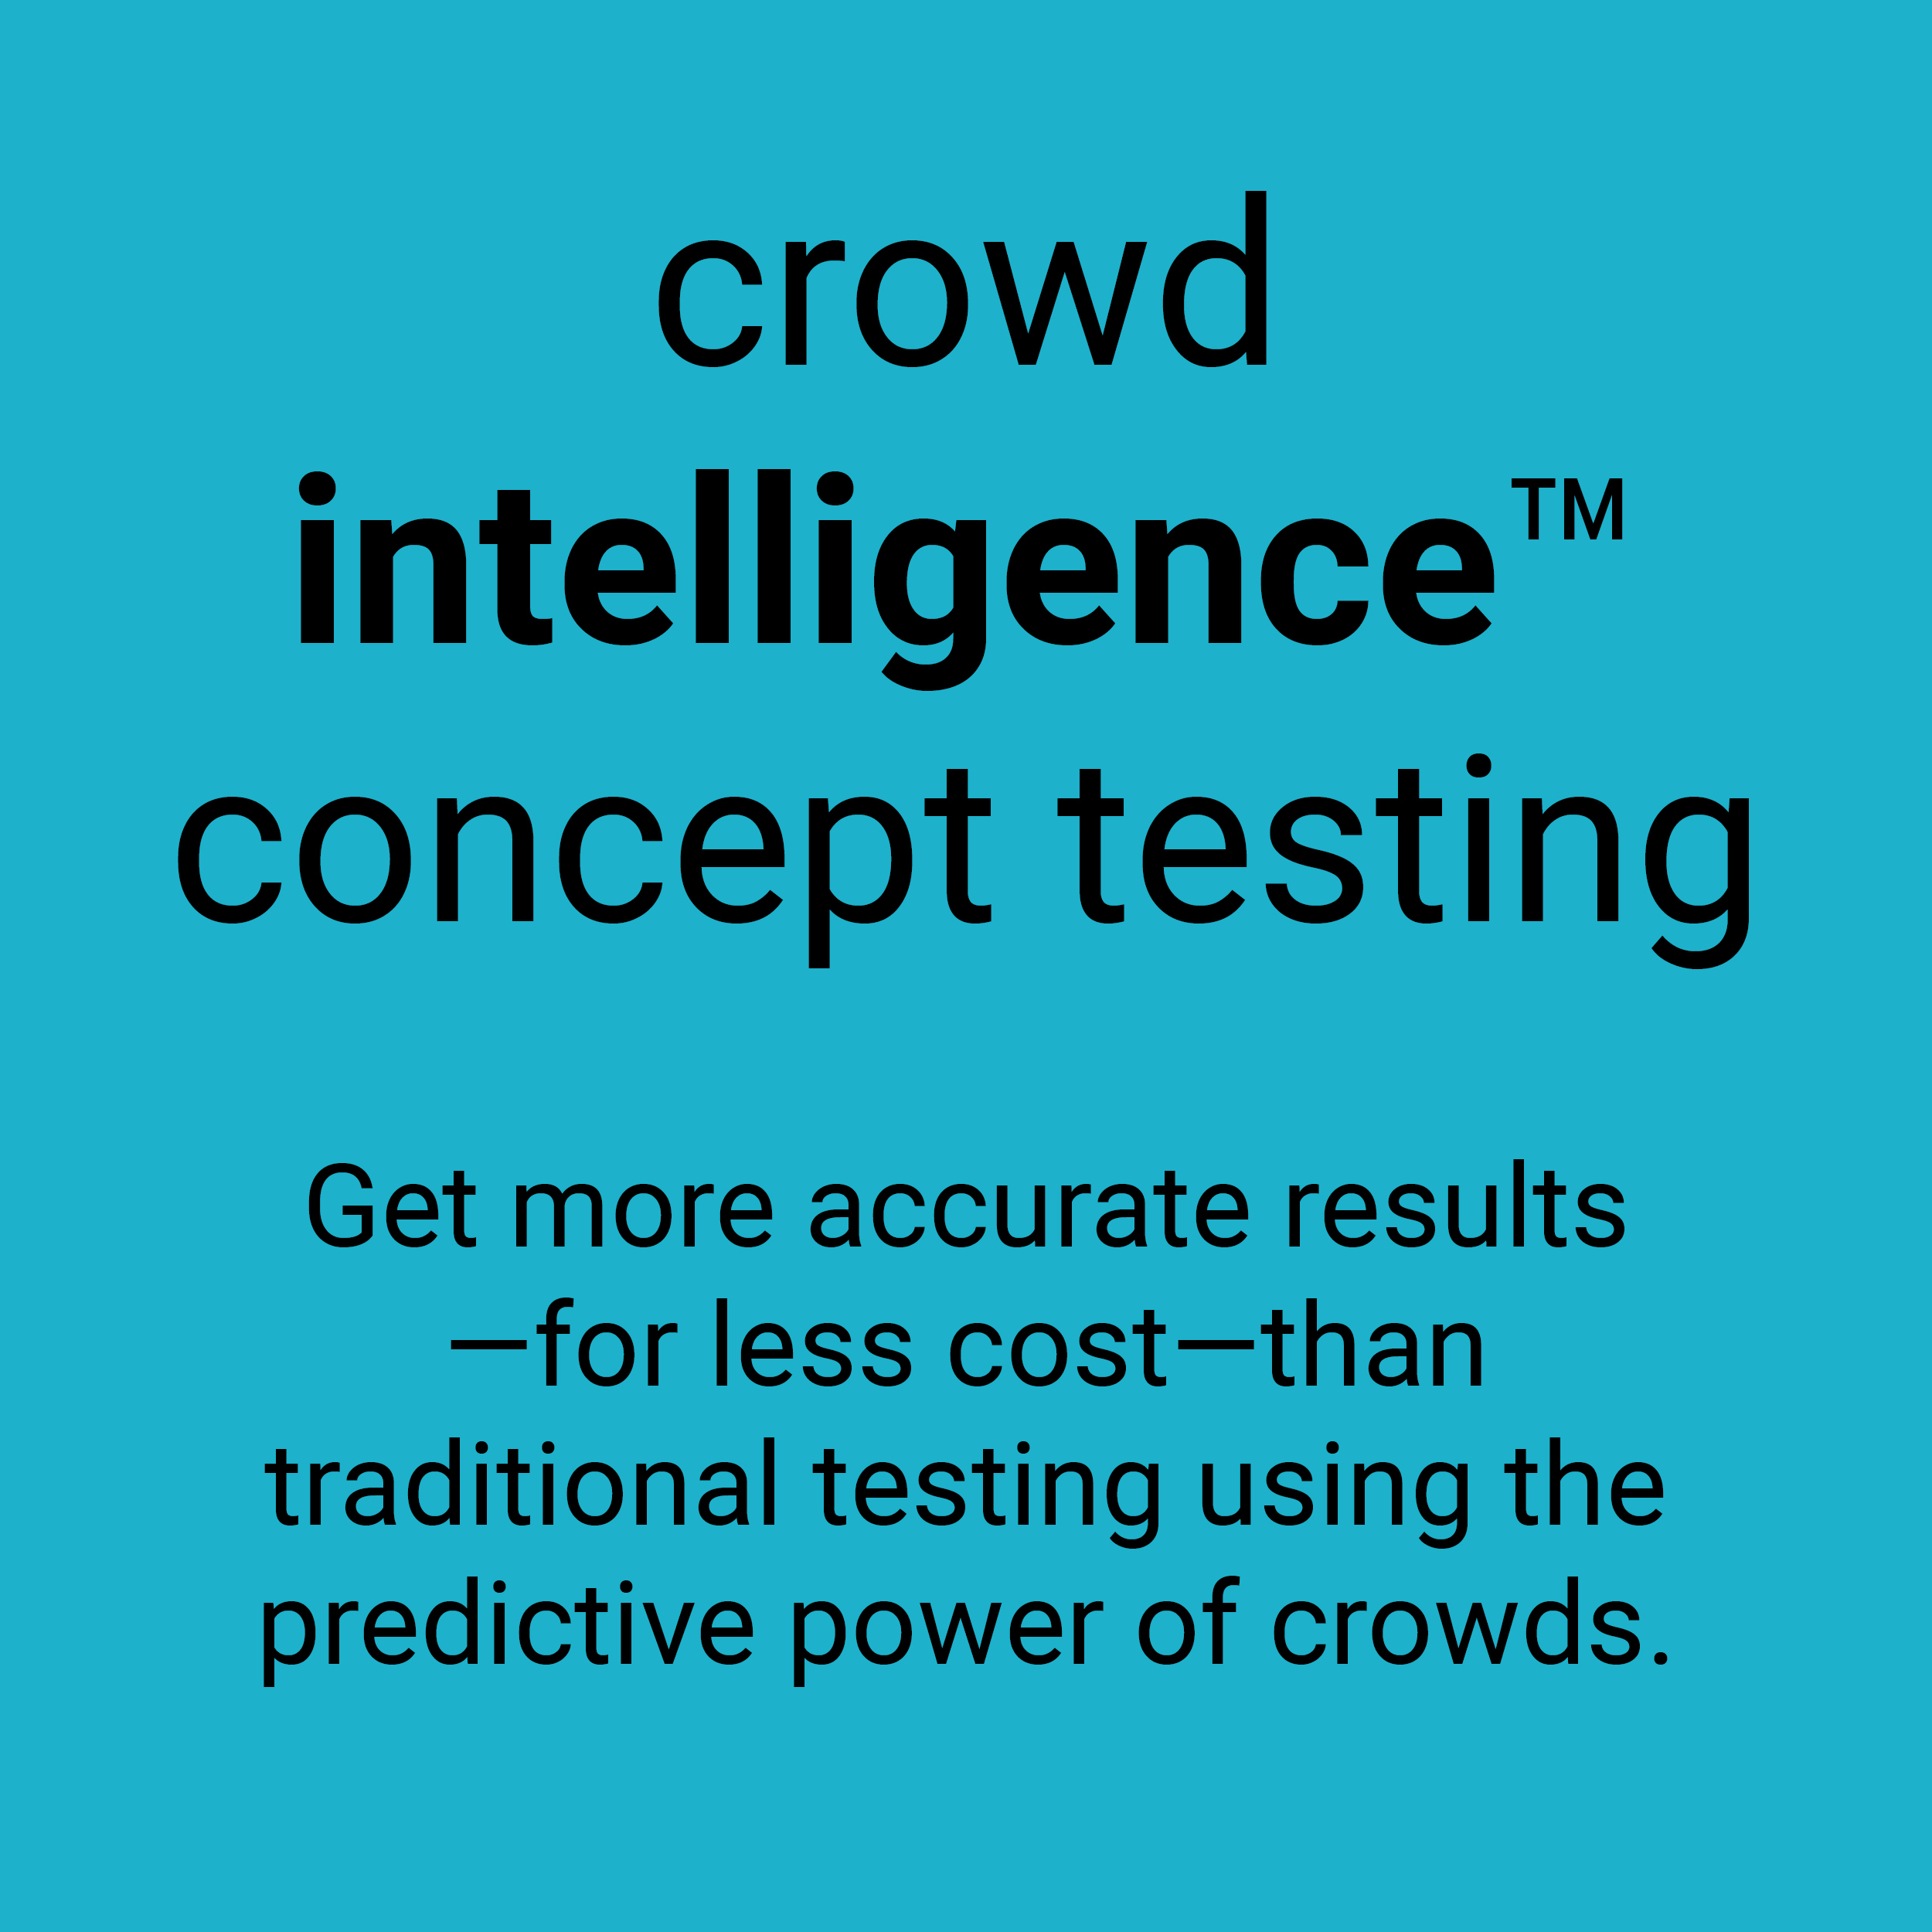 Crowd Intelligence concept testing. Get more accurate results - for less cost - than traditional testing using the predictive power of crowds.